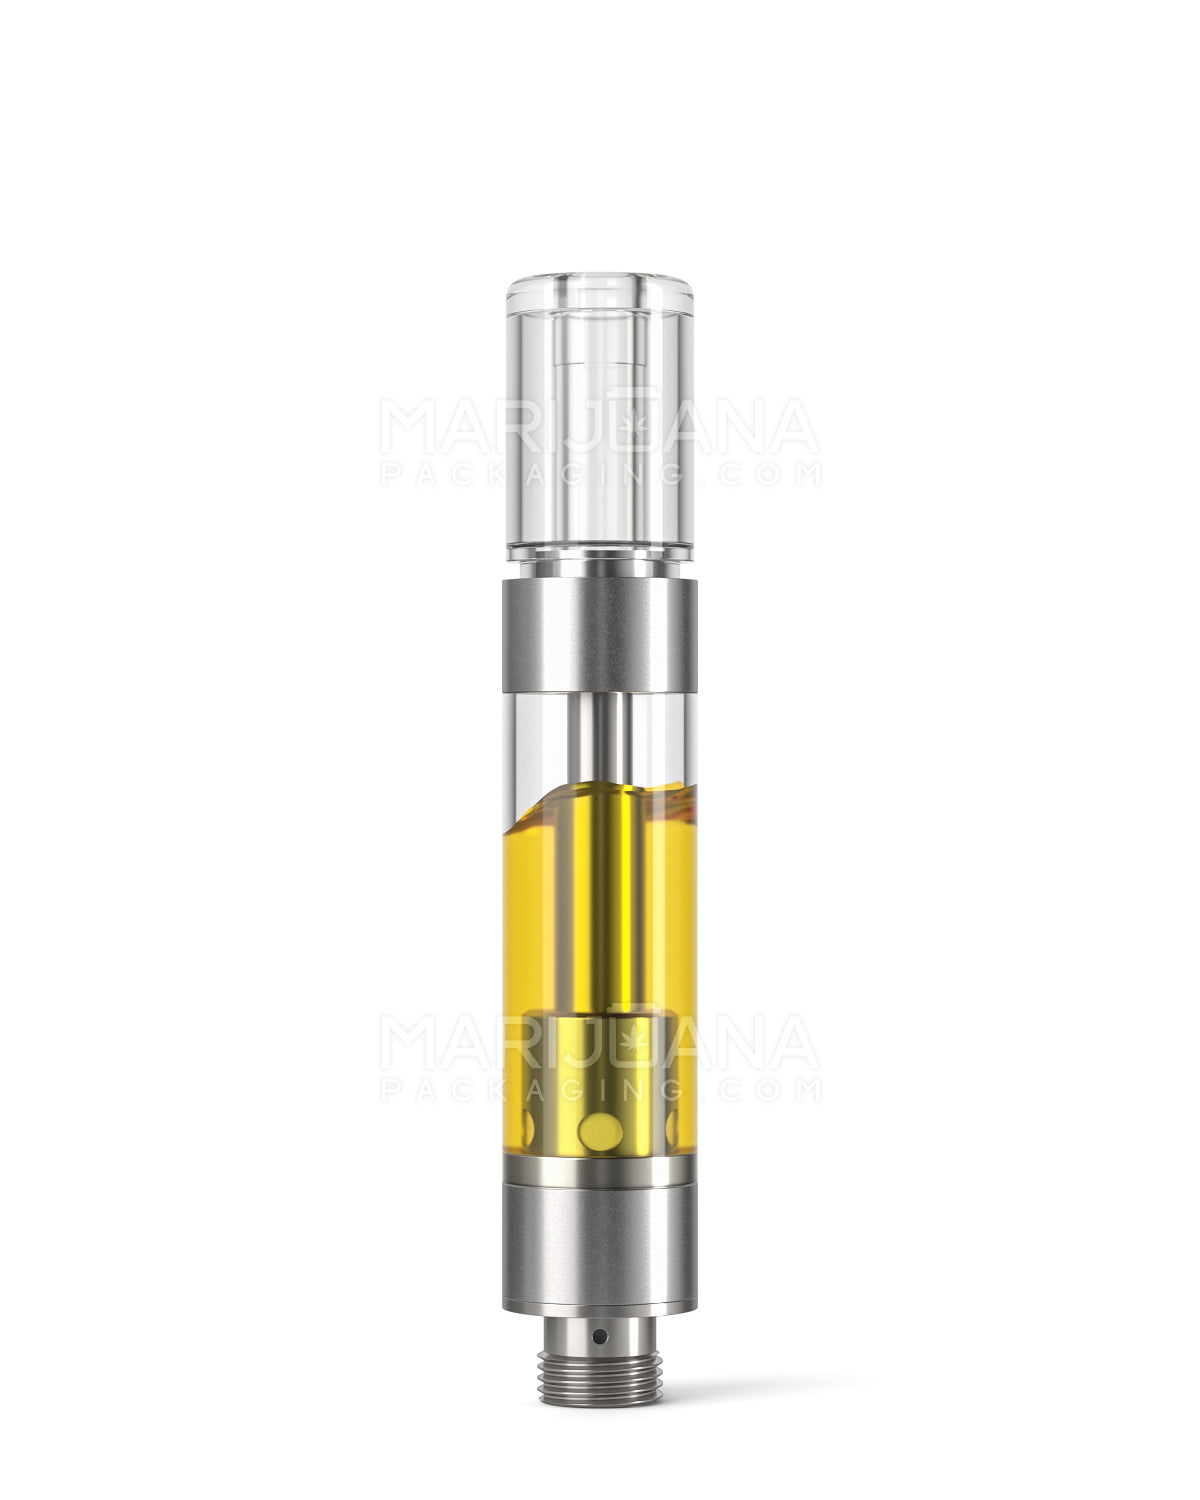 CCELL | Liquid6 Reactor Plastic Vape Cartridge with Barrel Clear Plastic Mouthpiece | 1mL - Press On - 100 Count - 2